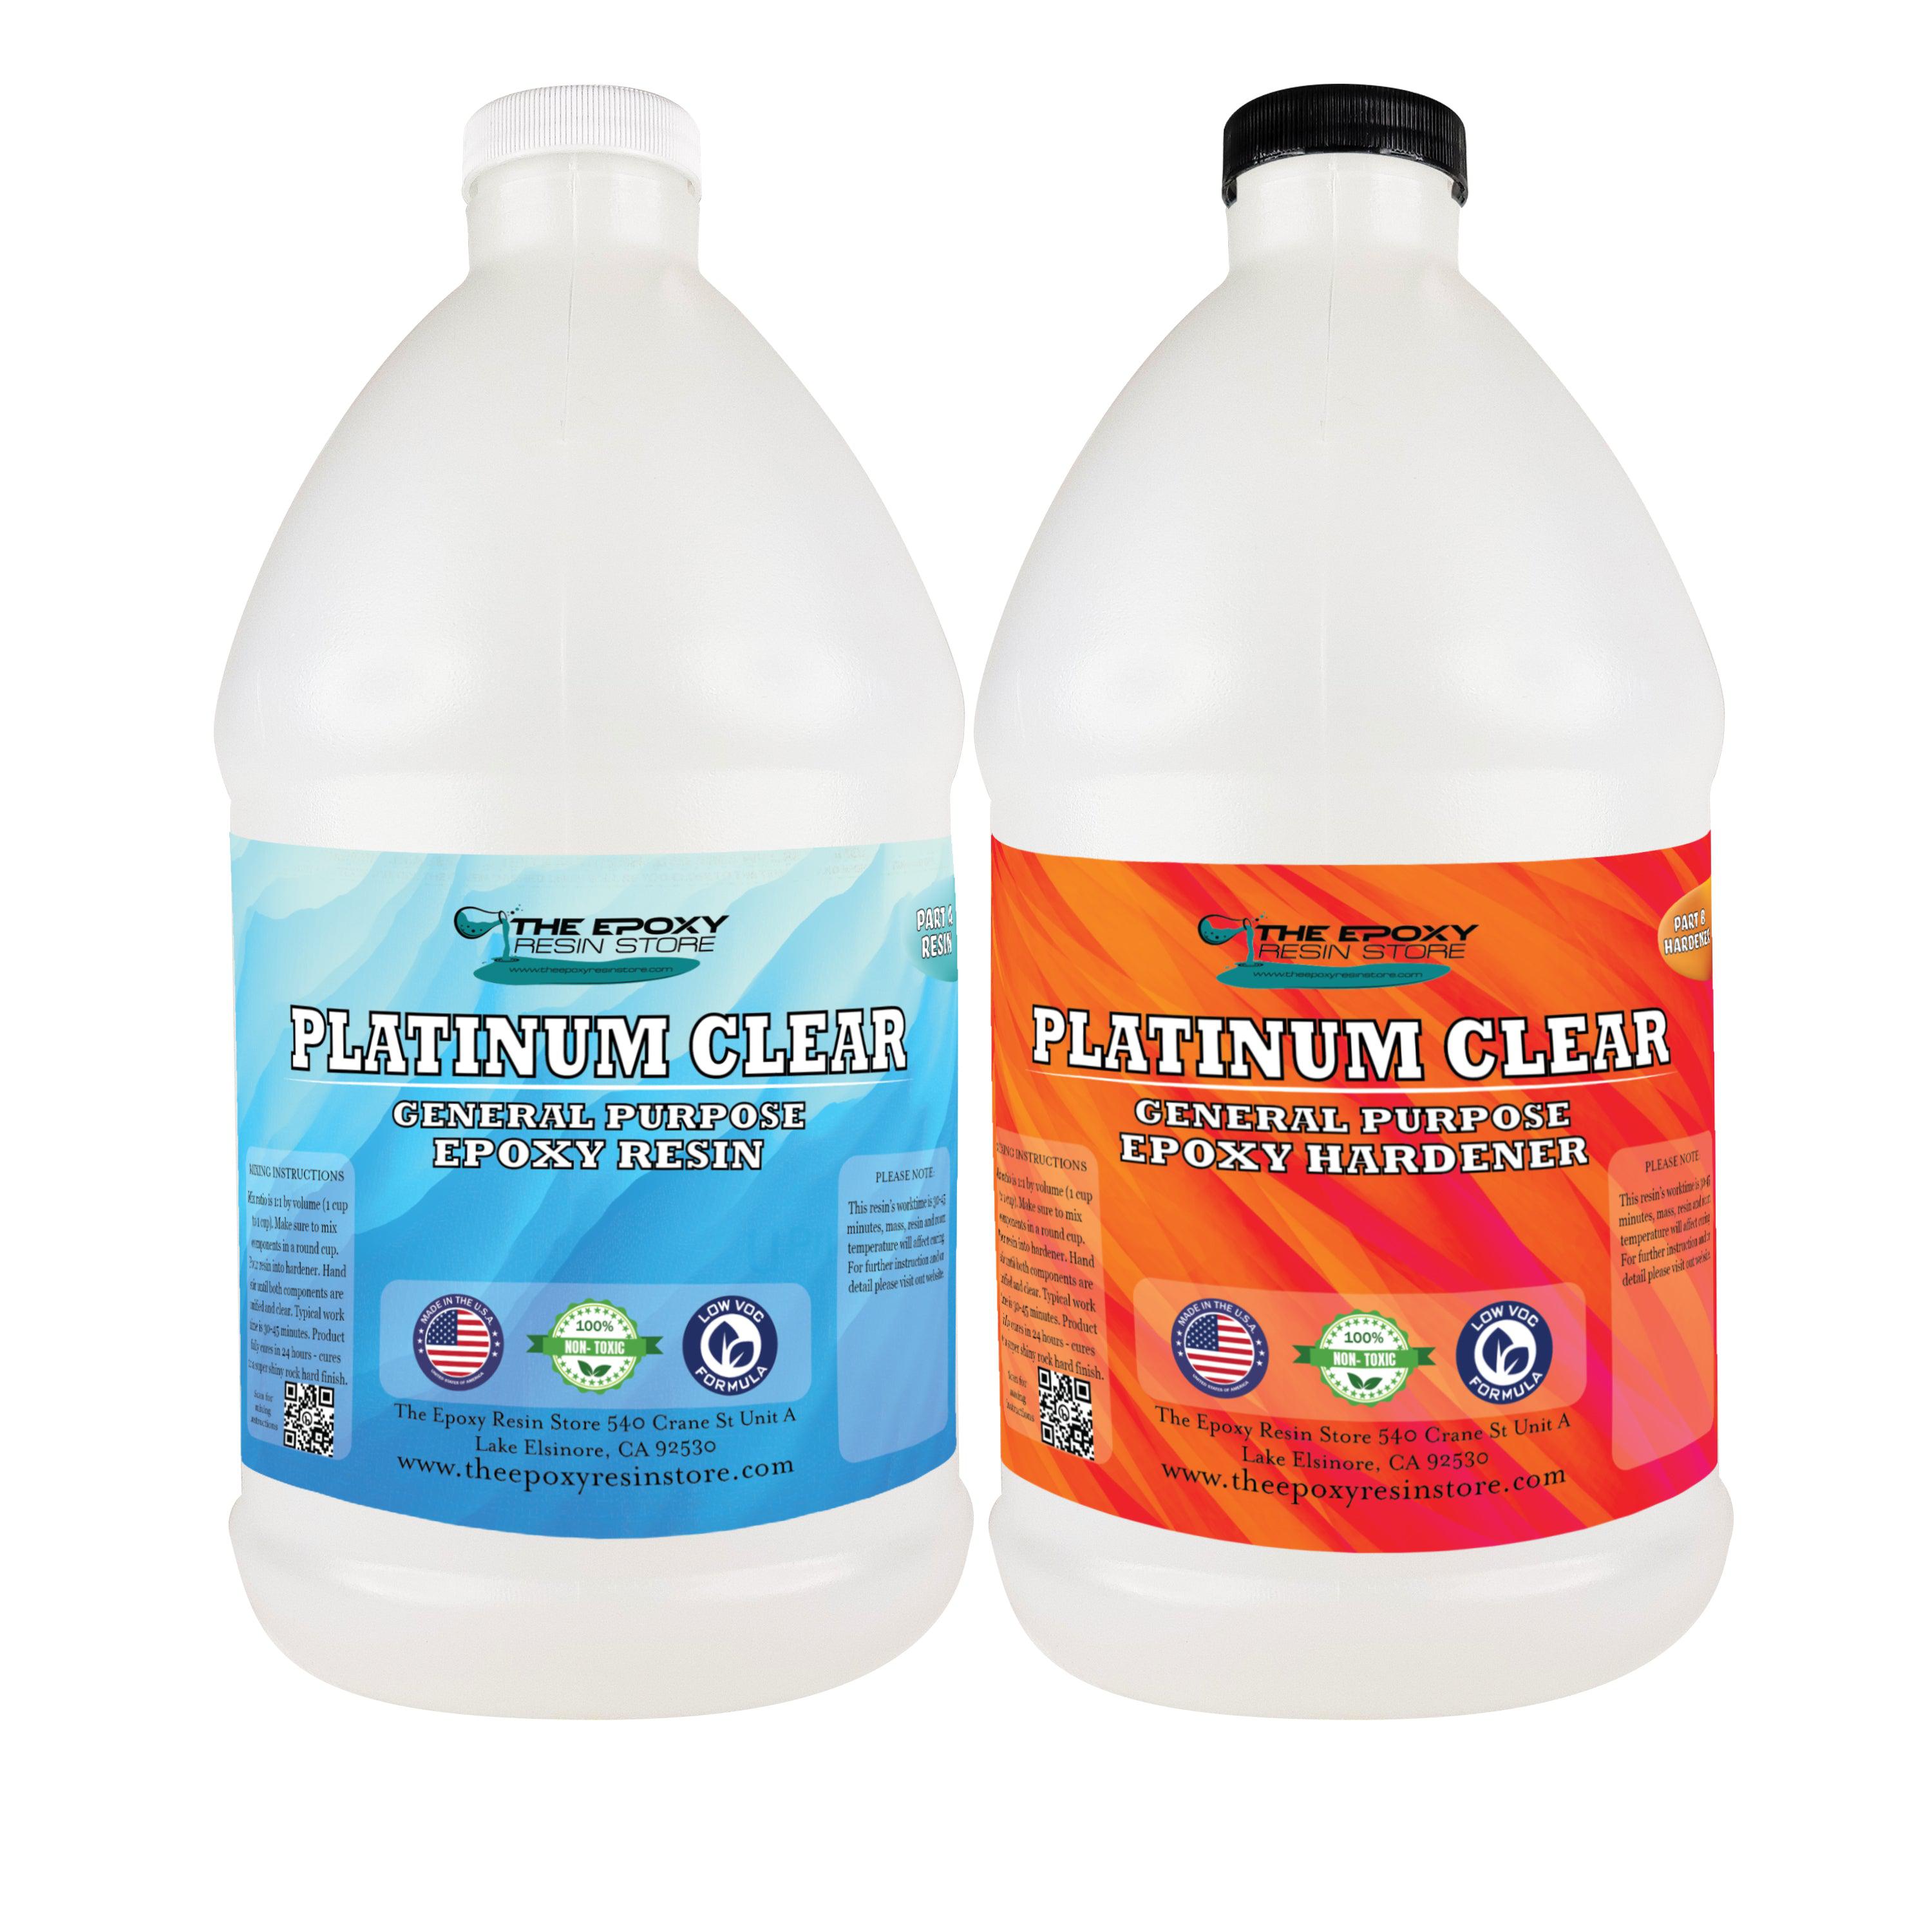 SuperClear Premium Epoxy Resin Crystal Clear for Superior Wood Tables and River Tables - 1 Gallon 2 Part Epoxy Resin Kit